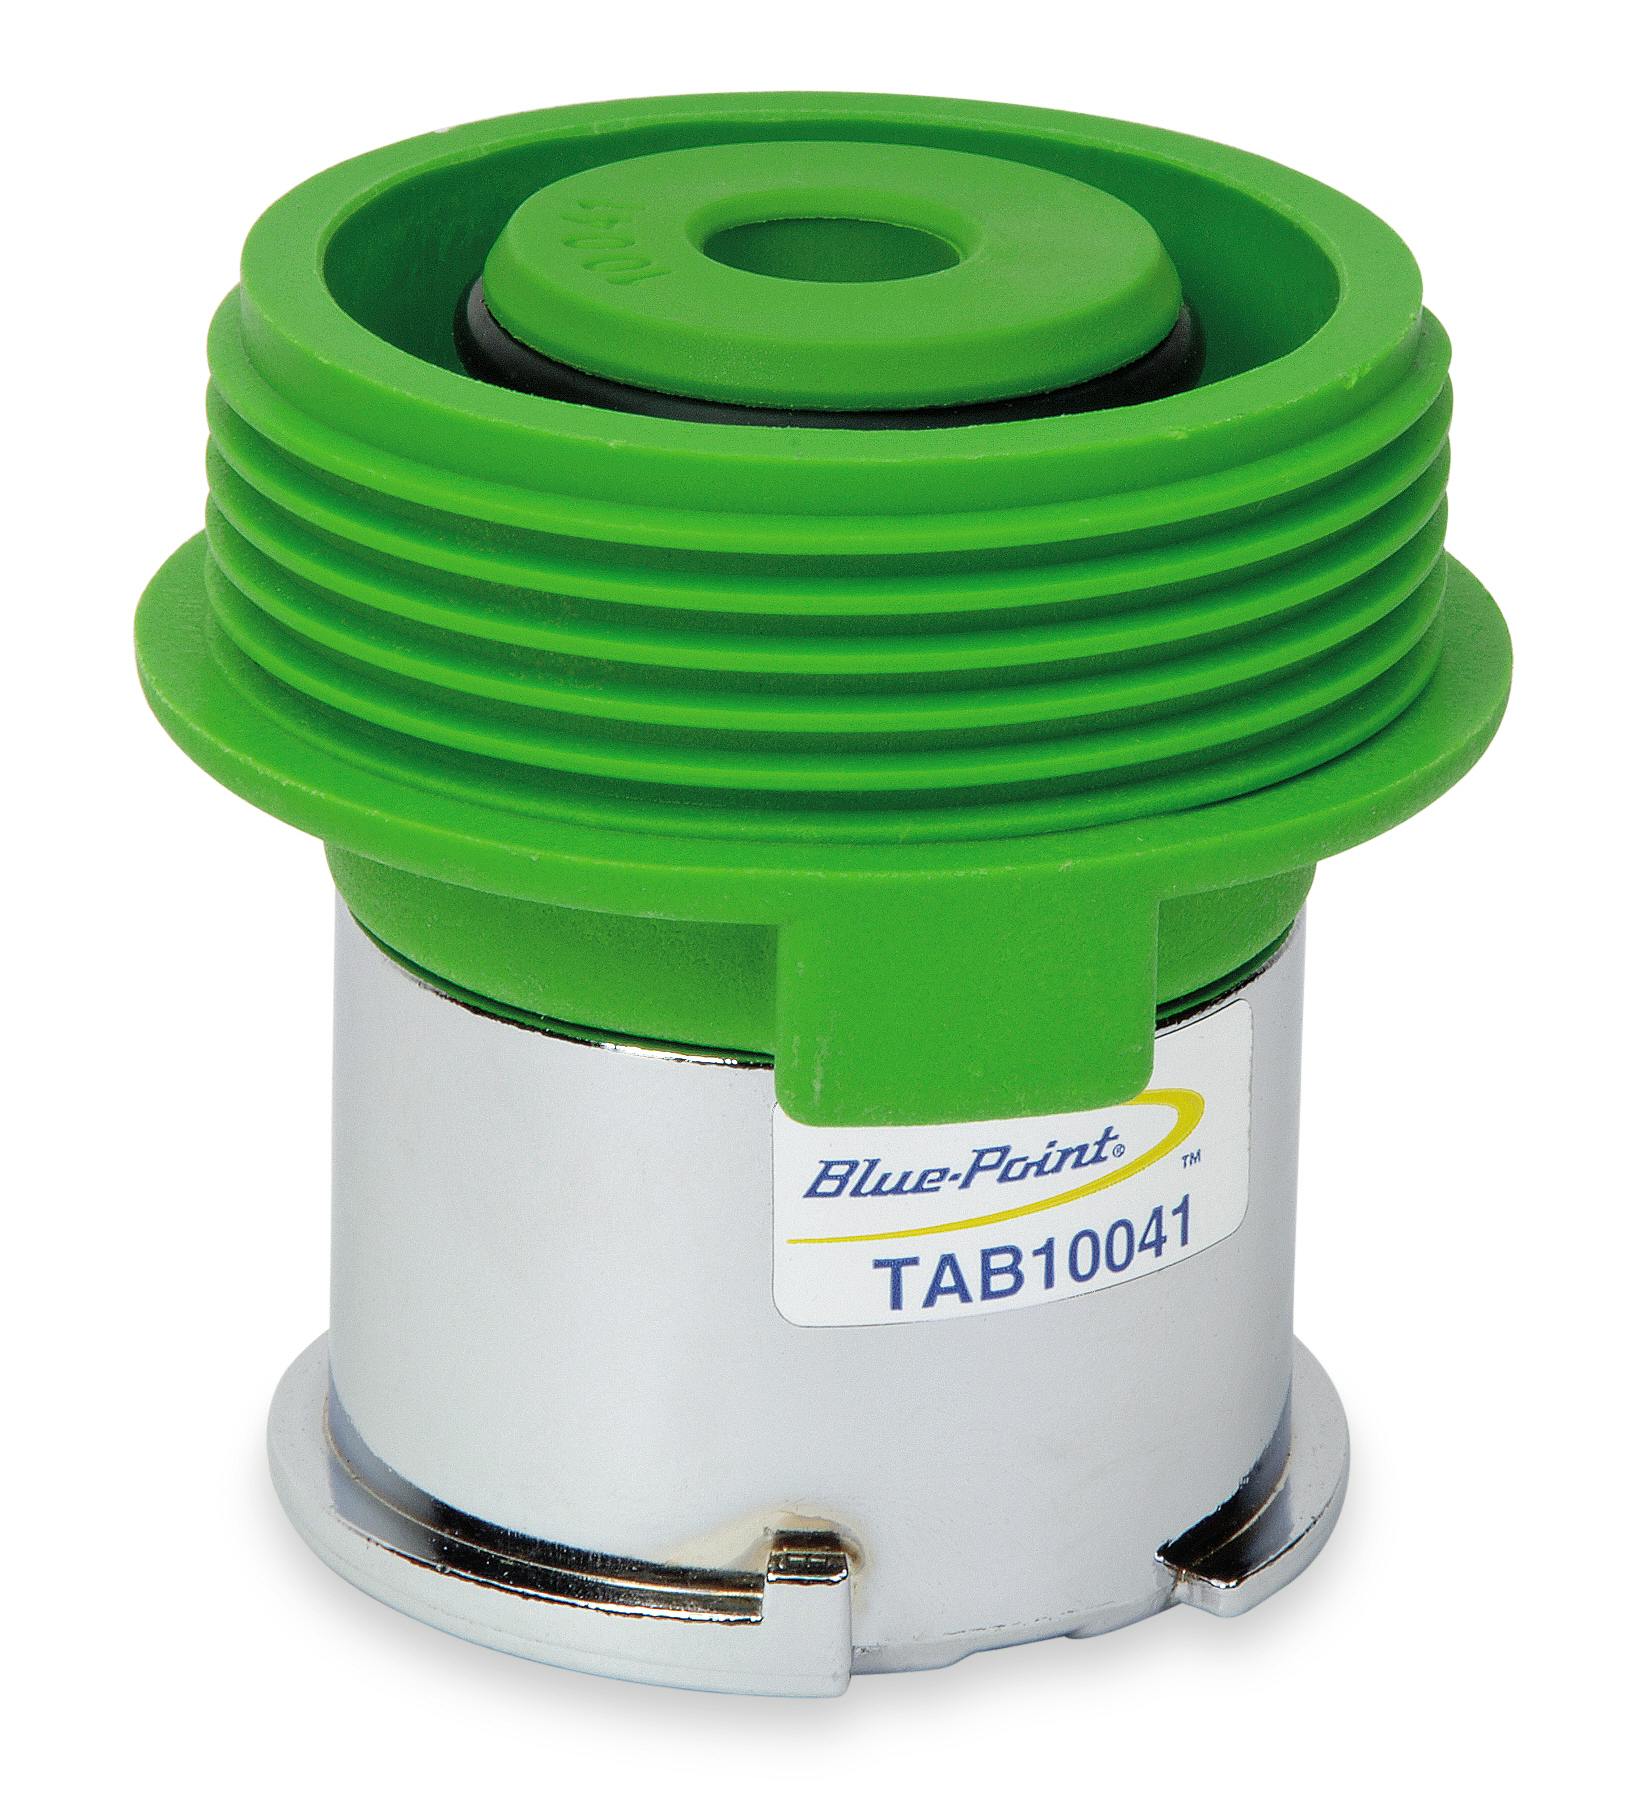 Cooling System Adaptor (Blue-Point®) (Green)